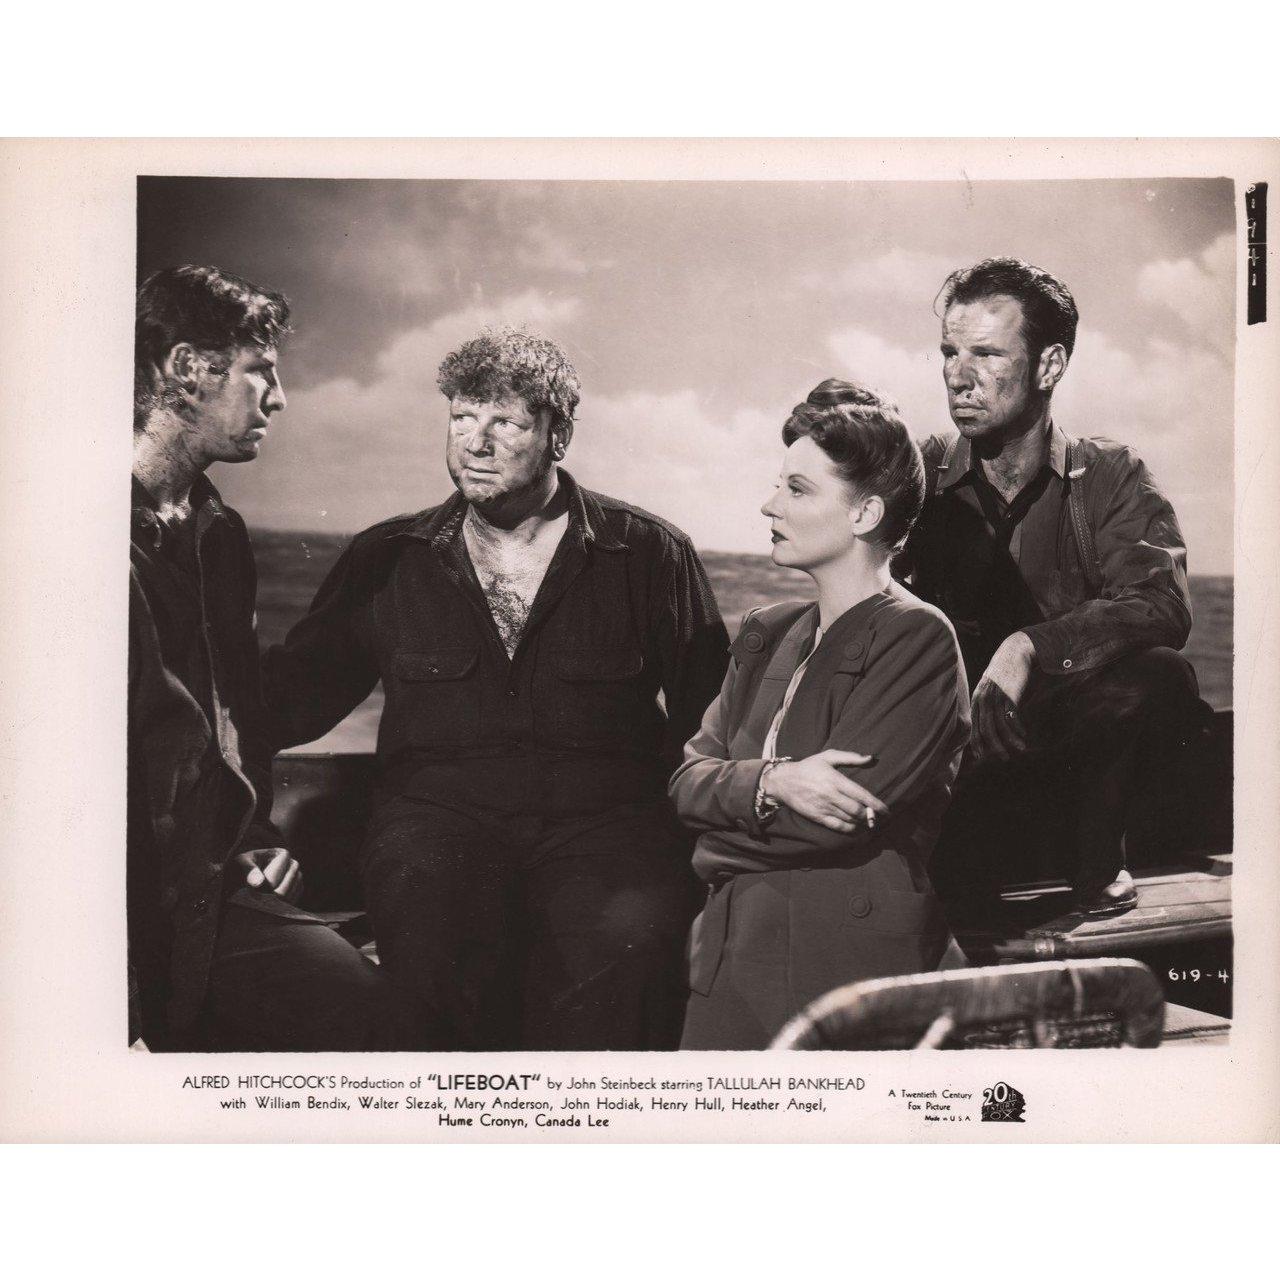 Original 1944 U.S. silver gelatin single-weight photo for the film Lifeboat directed by Alfred Hitchcock with Tallulah Bankhead / William Bendix / Walter Slezak / Mary Anderson. Fine condition. Please note: the size is stated in inches and the